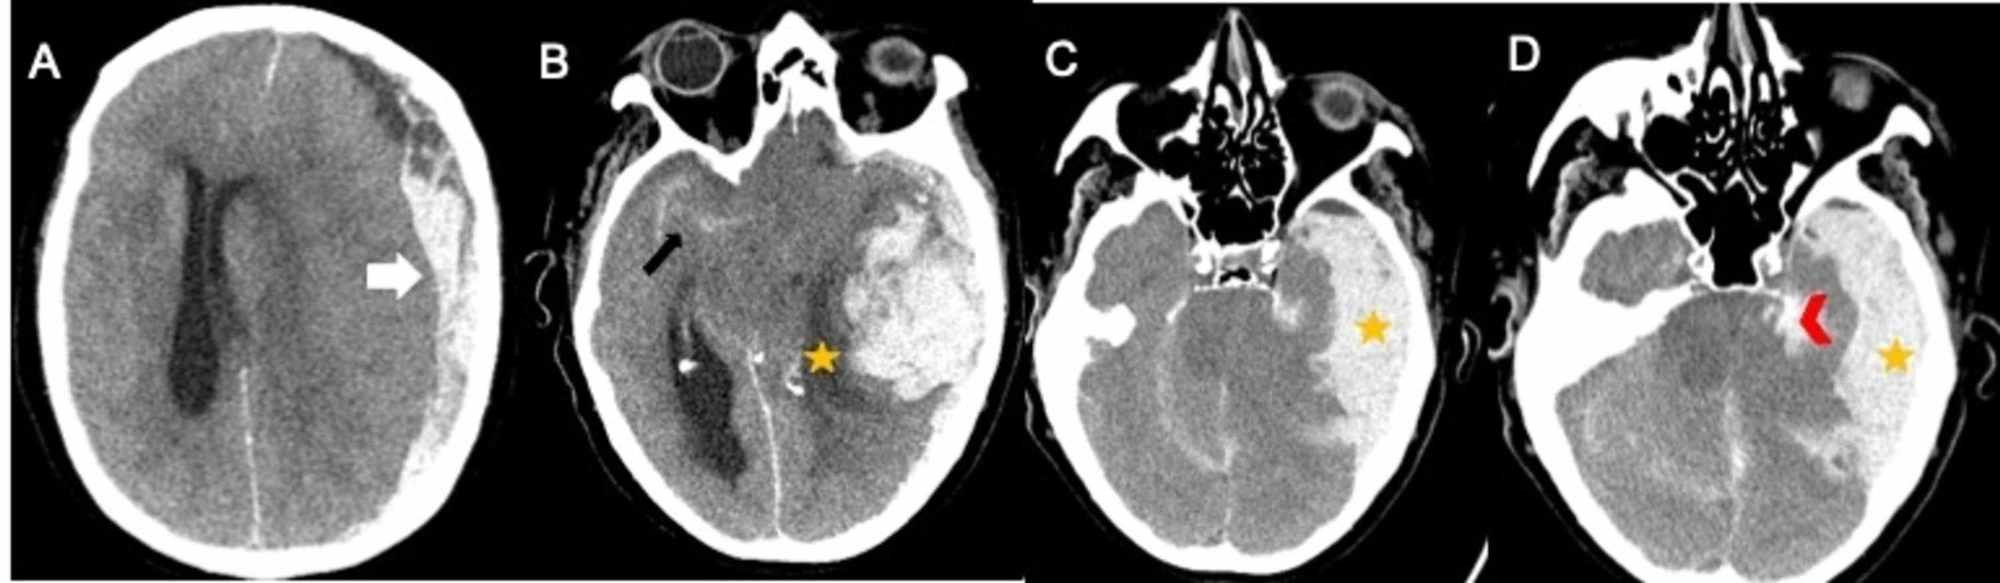 Cureus Intracranial Hemorrhage in a Patient With COVID19 Possible